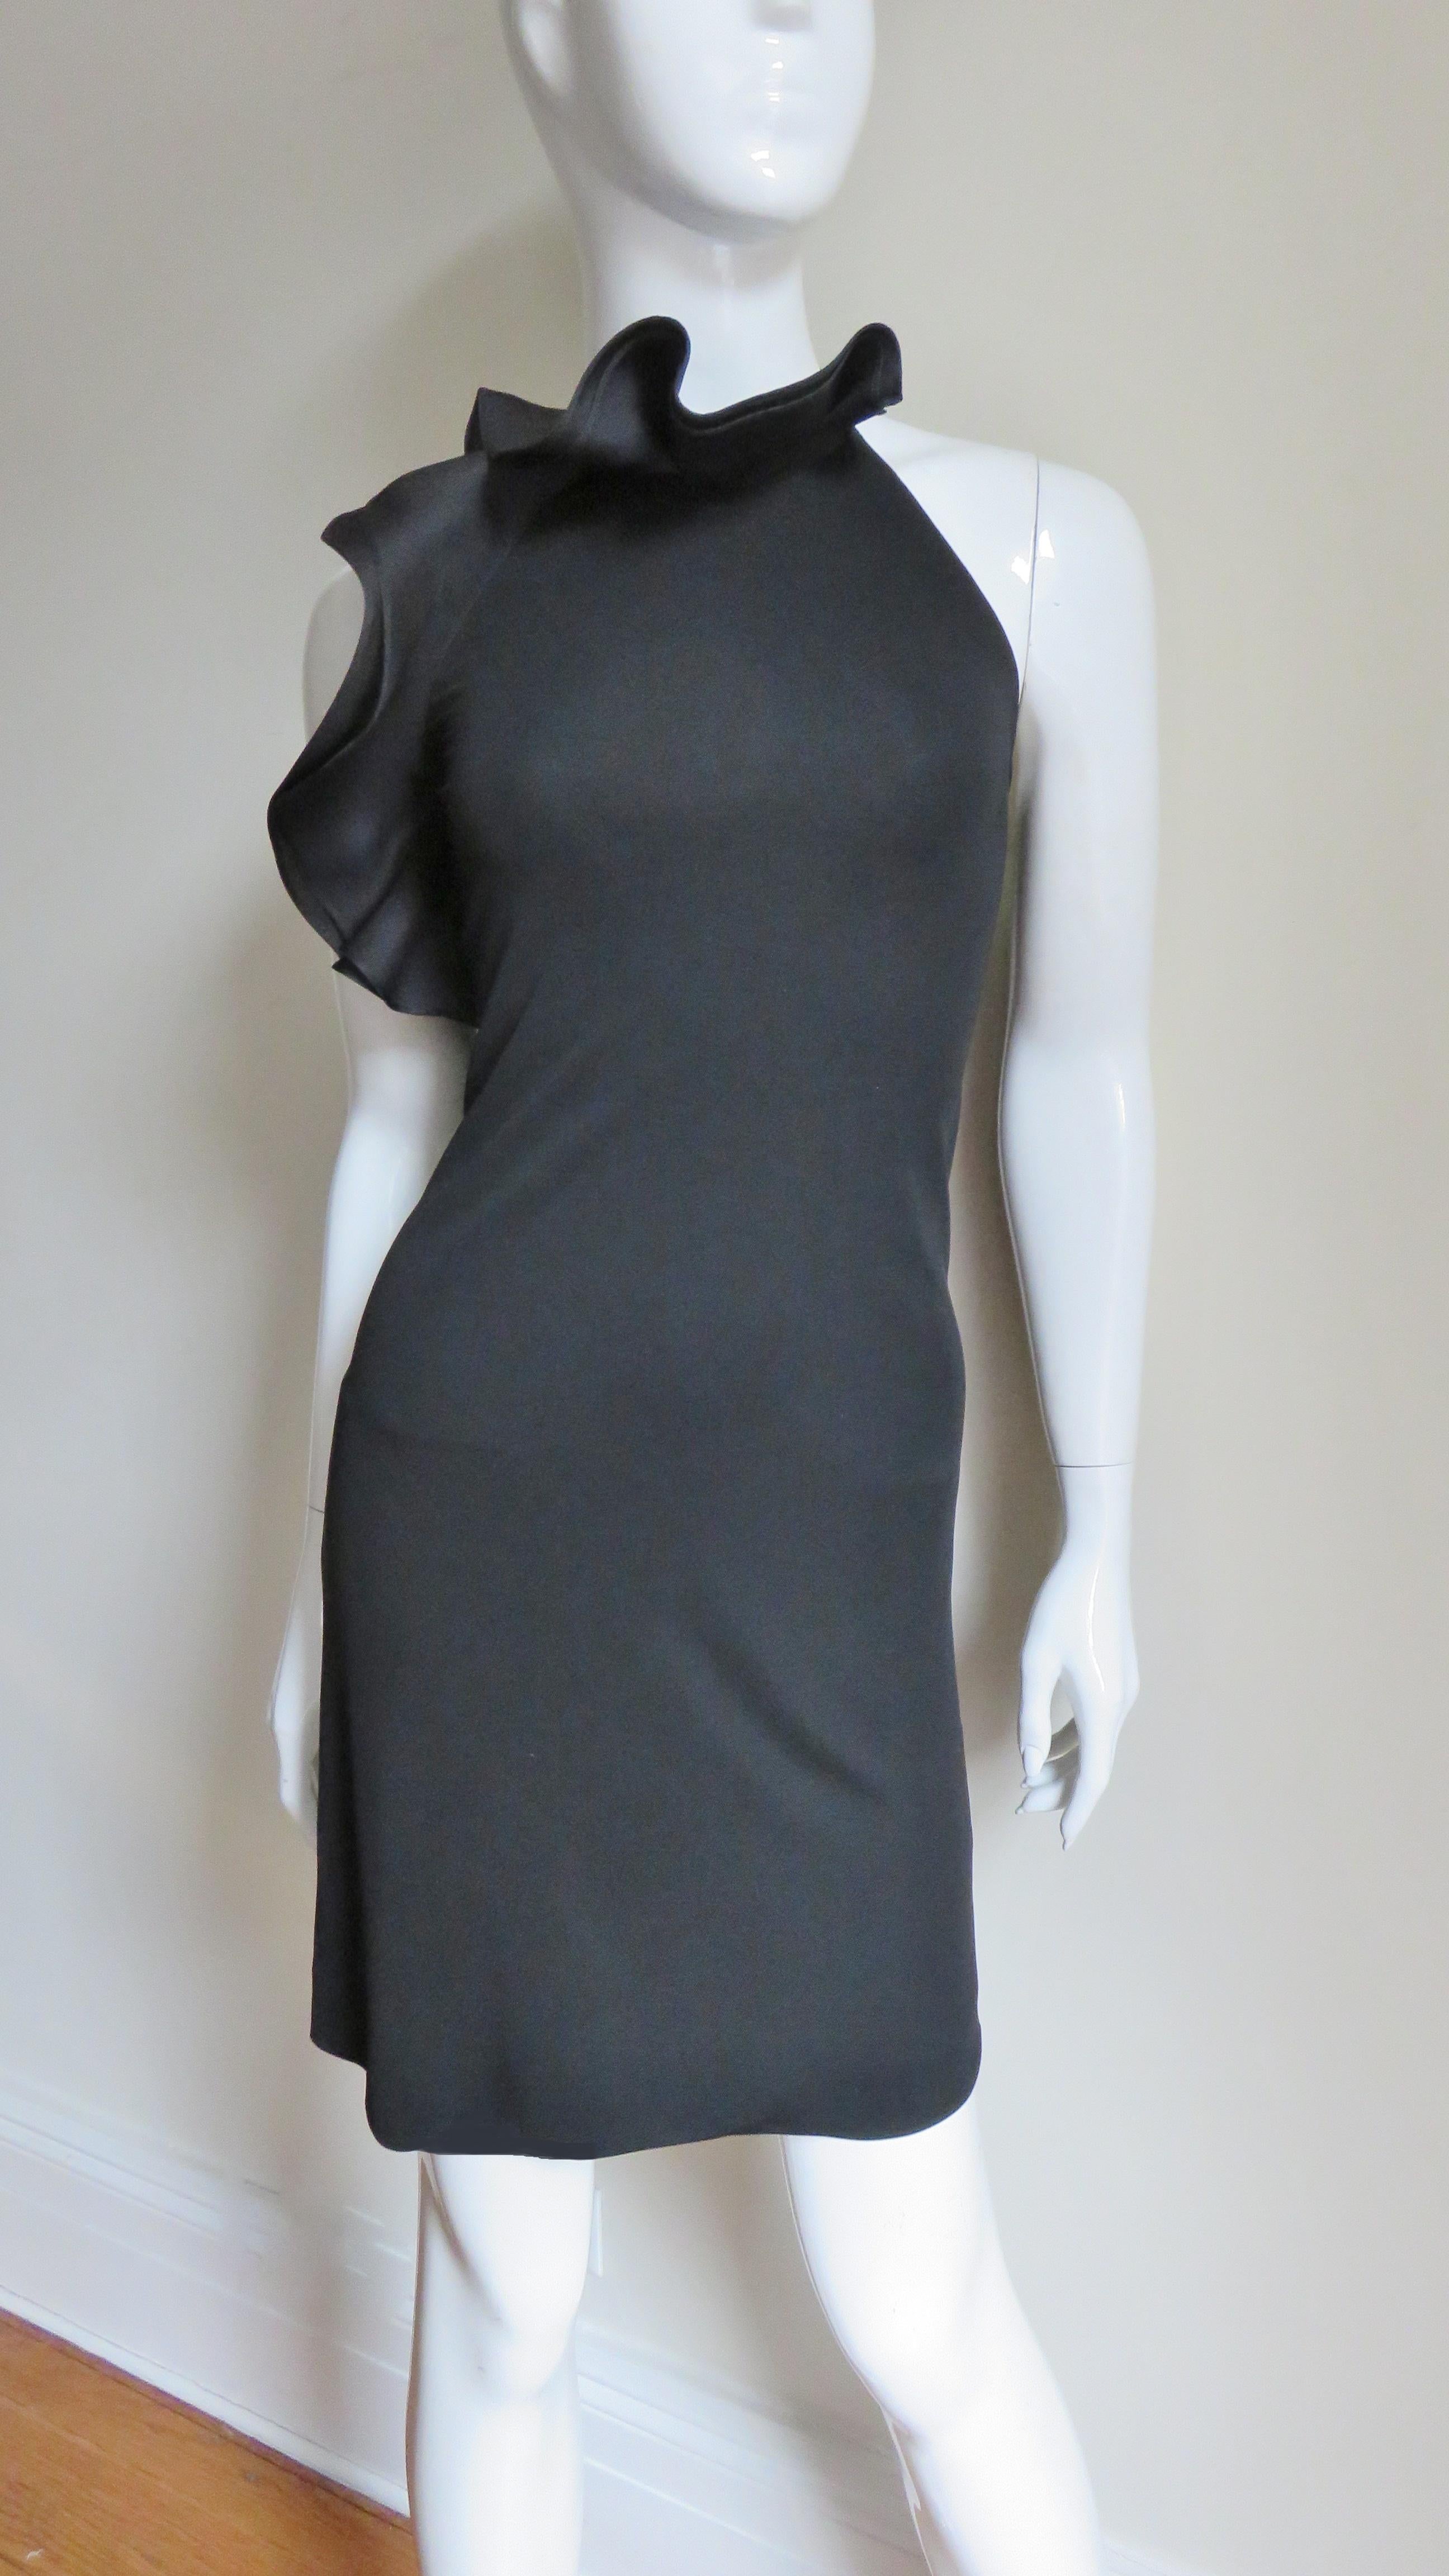  Gucci Ruffle Neck Silk Halter Dress In Good Condition For Sale In Water Mill, NY